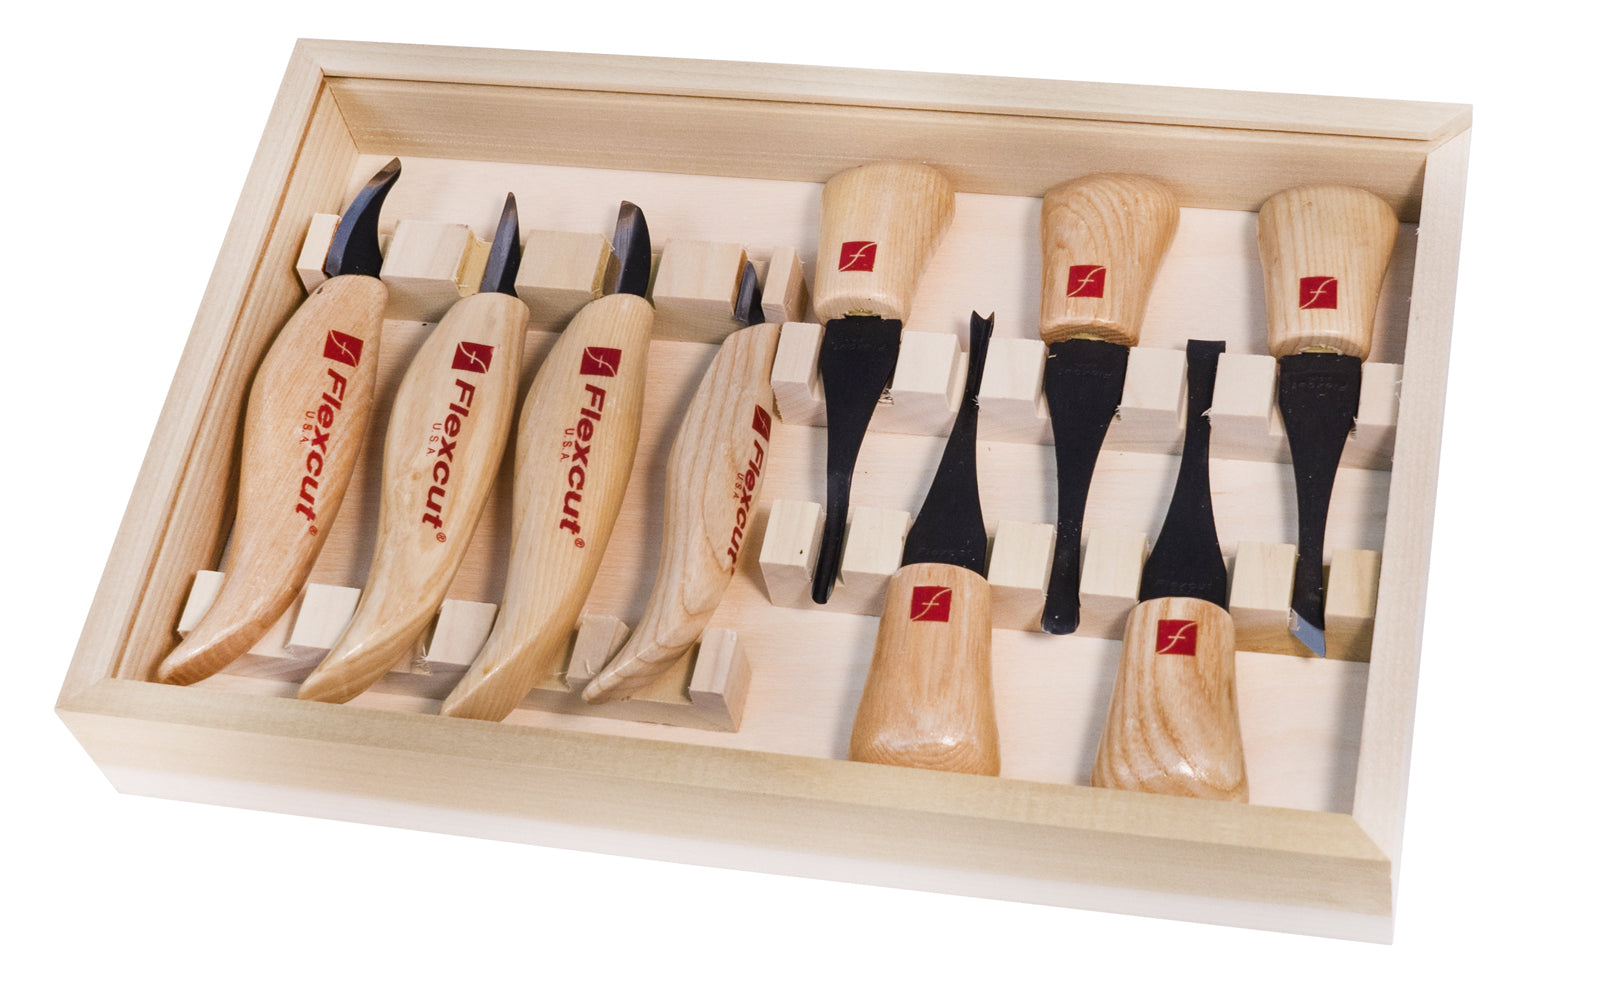 Professional Wood Carving Tools: Five-Piece Chip Wood Carving Knife Set